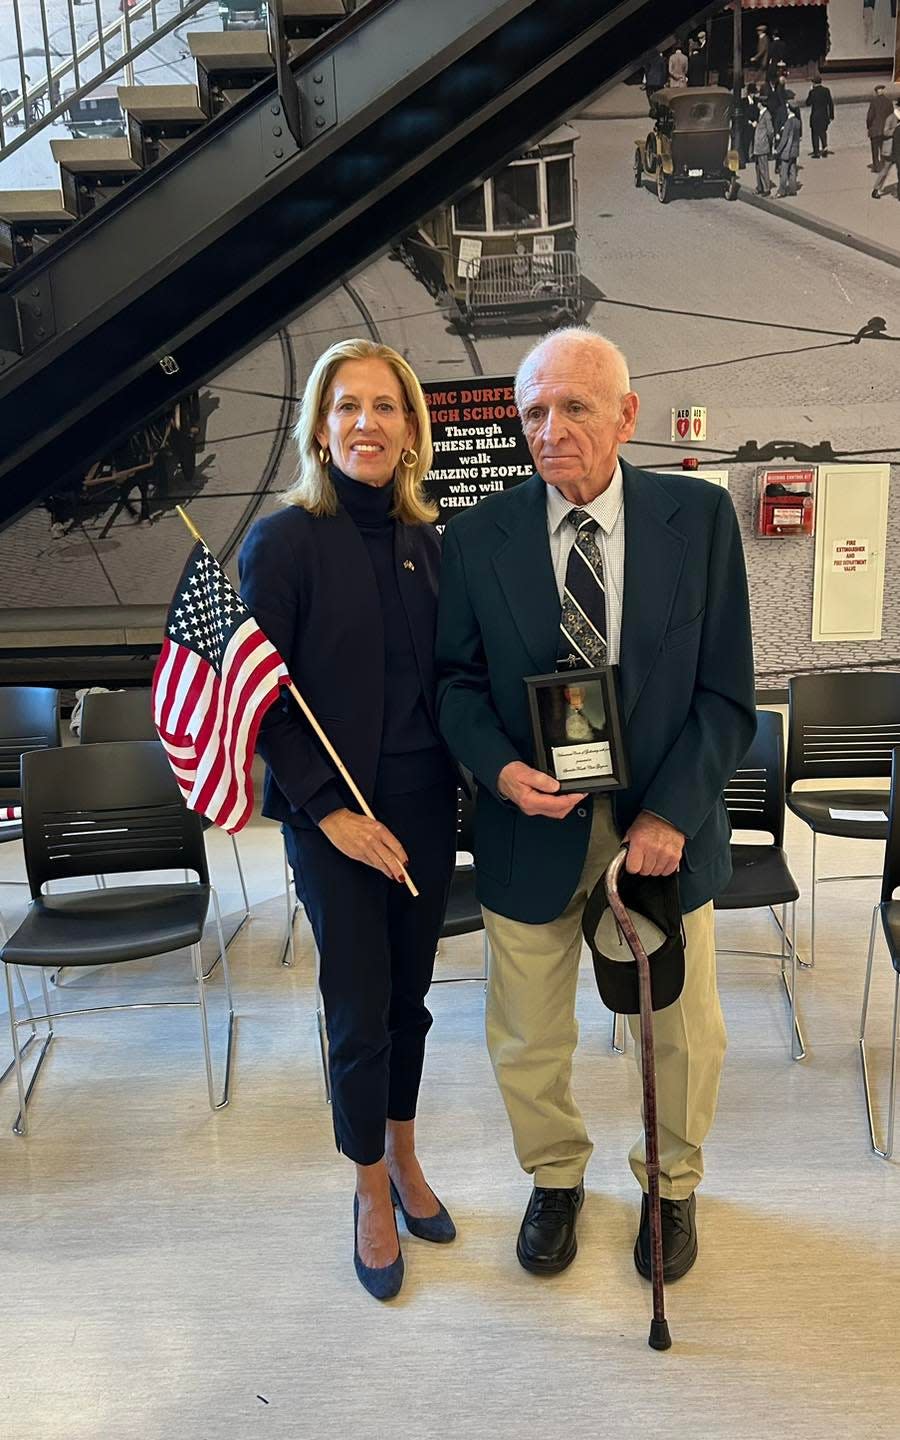 Specialist Fourth Class Charles Norman Gagnon and State Rep. Carole Fiola. Gagnon received the Vietnamese Cross of Gallantry at the Fall River Veterans Day Ceremony at B.M.C. Durfee High School, nearly 58 years after he was awarded the recognition.